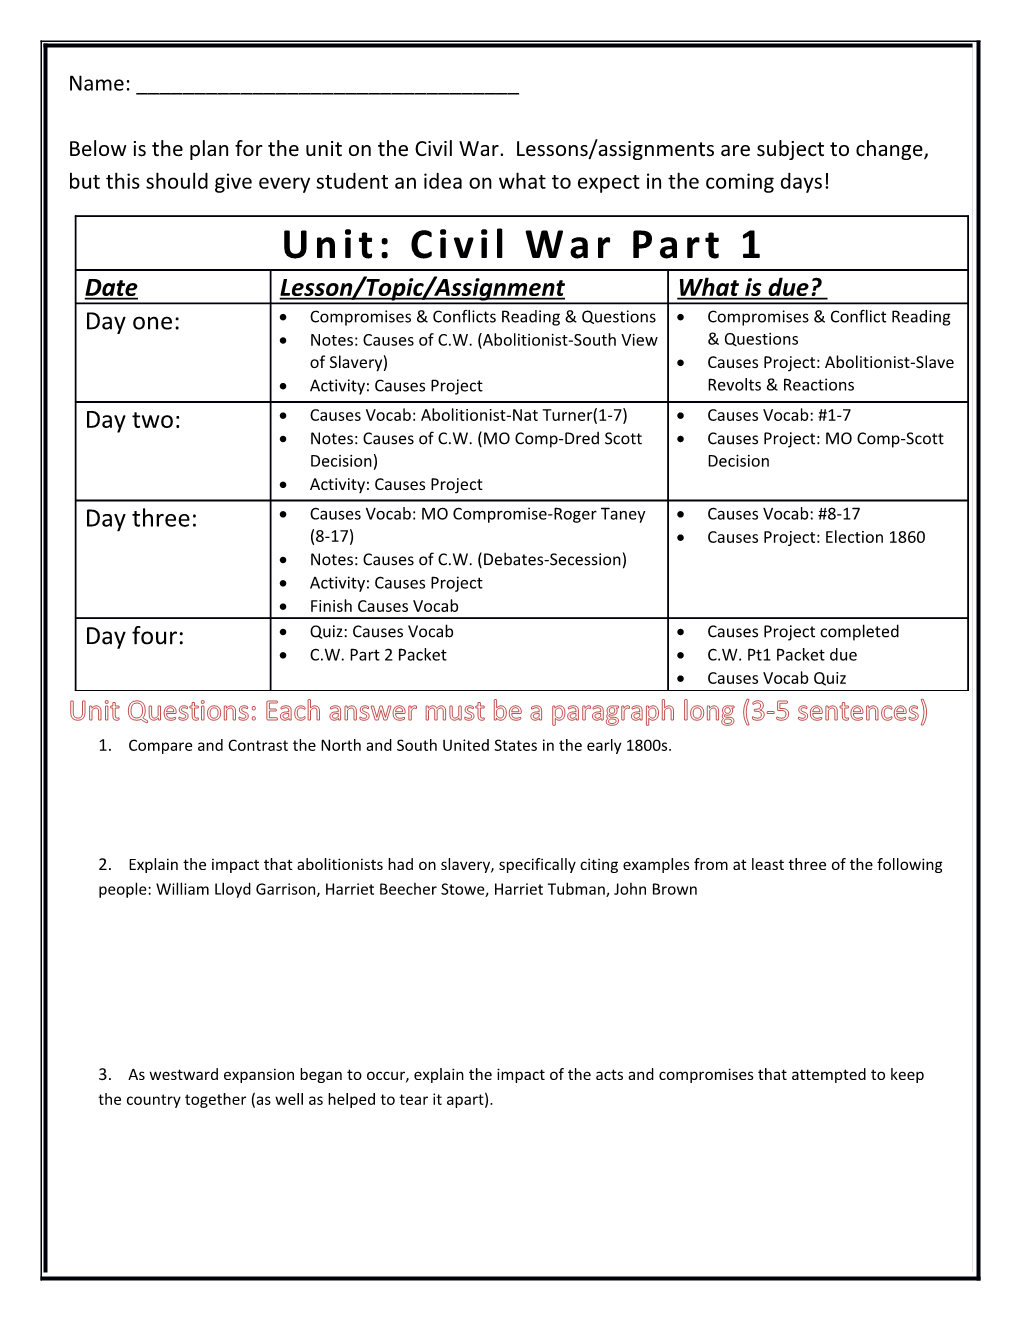 Name: ______ Below Is the Plan for the Unit on the Civil War. Lessons/Assignments Are Subject